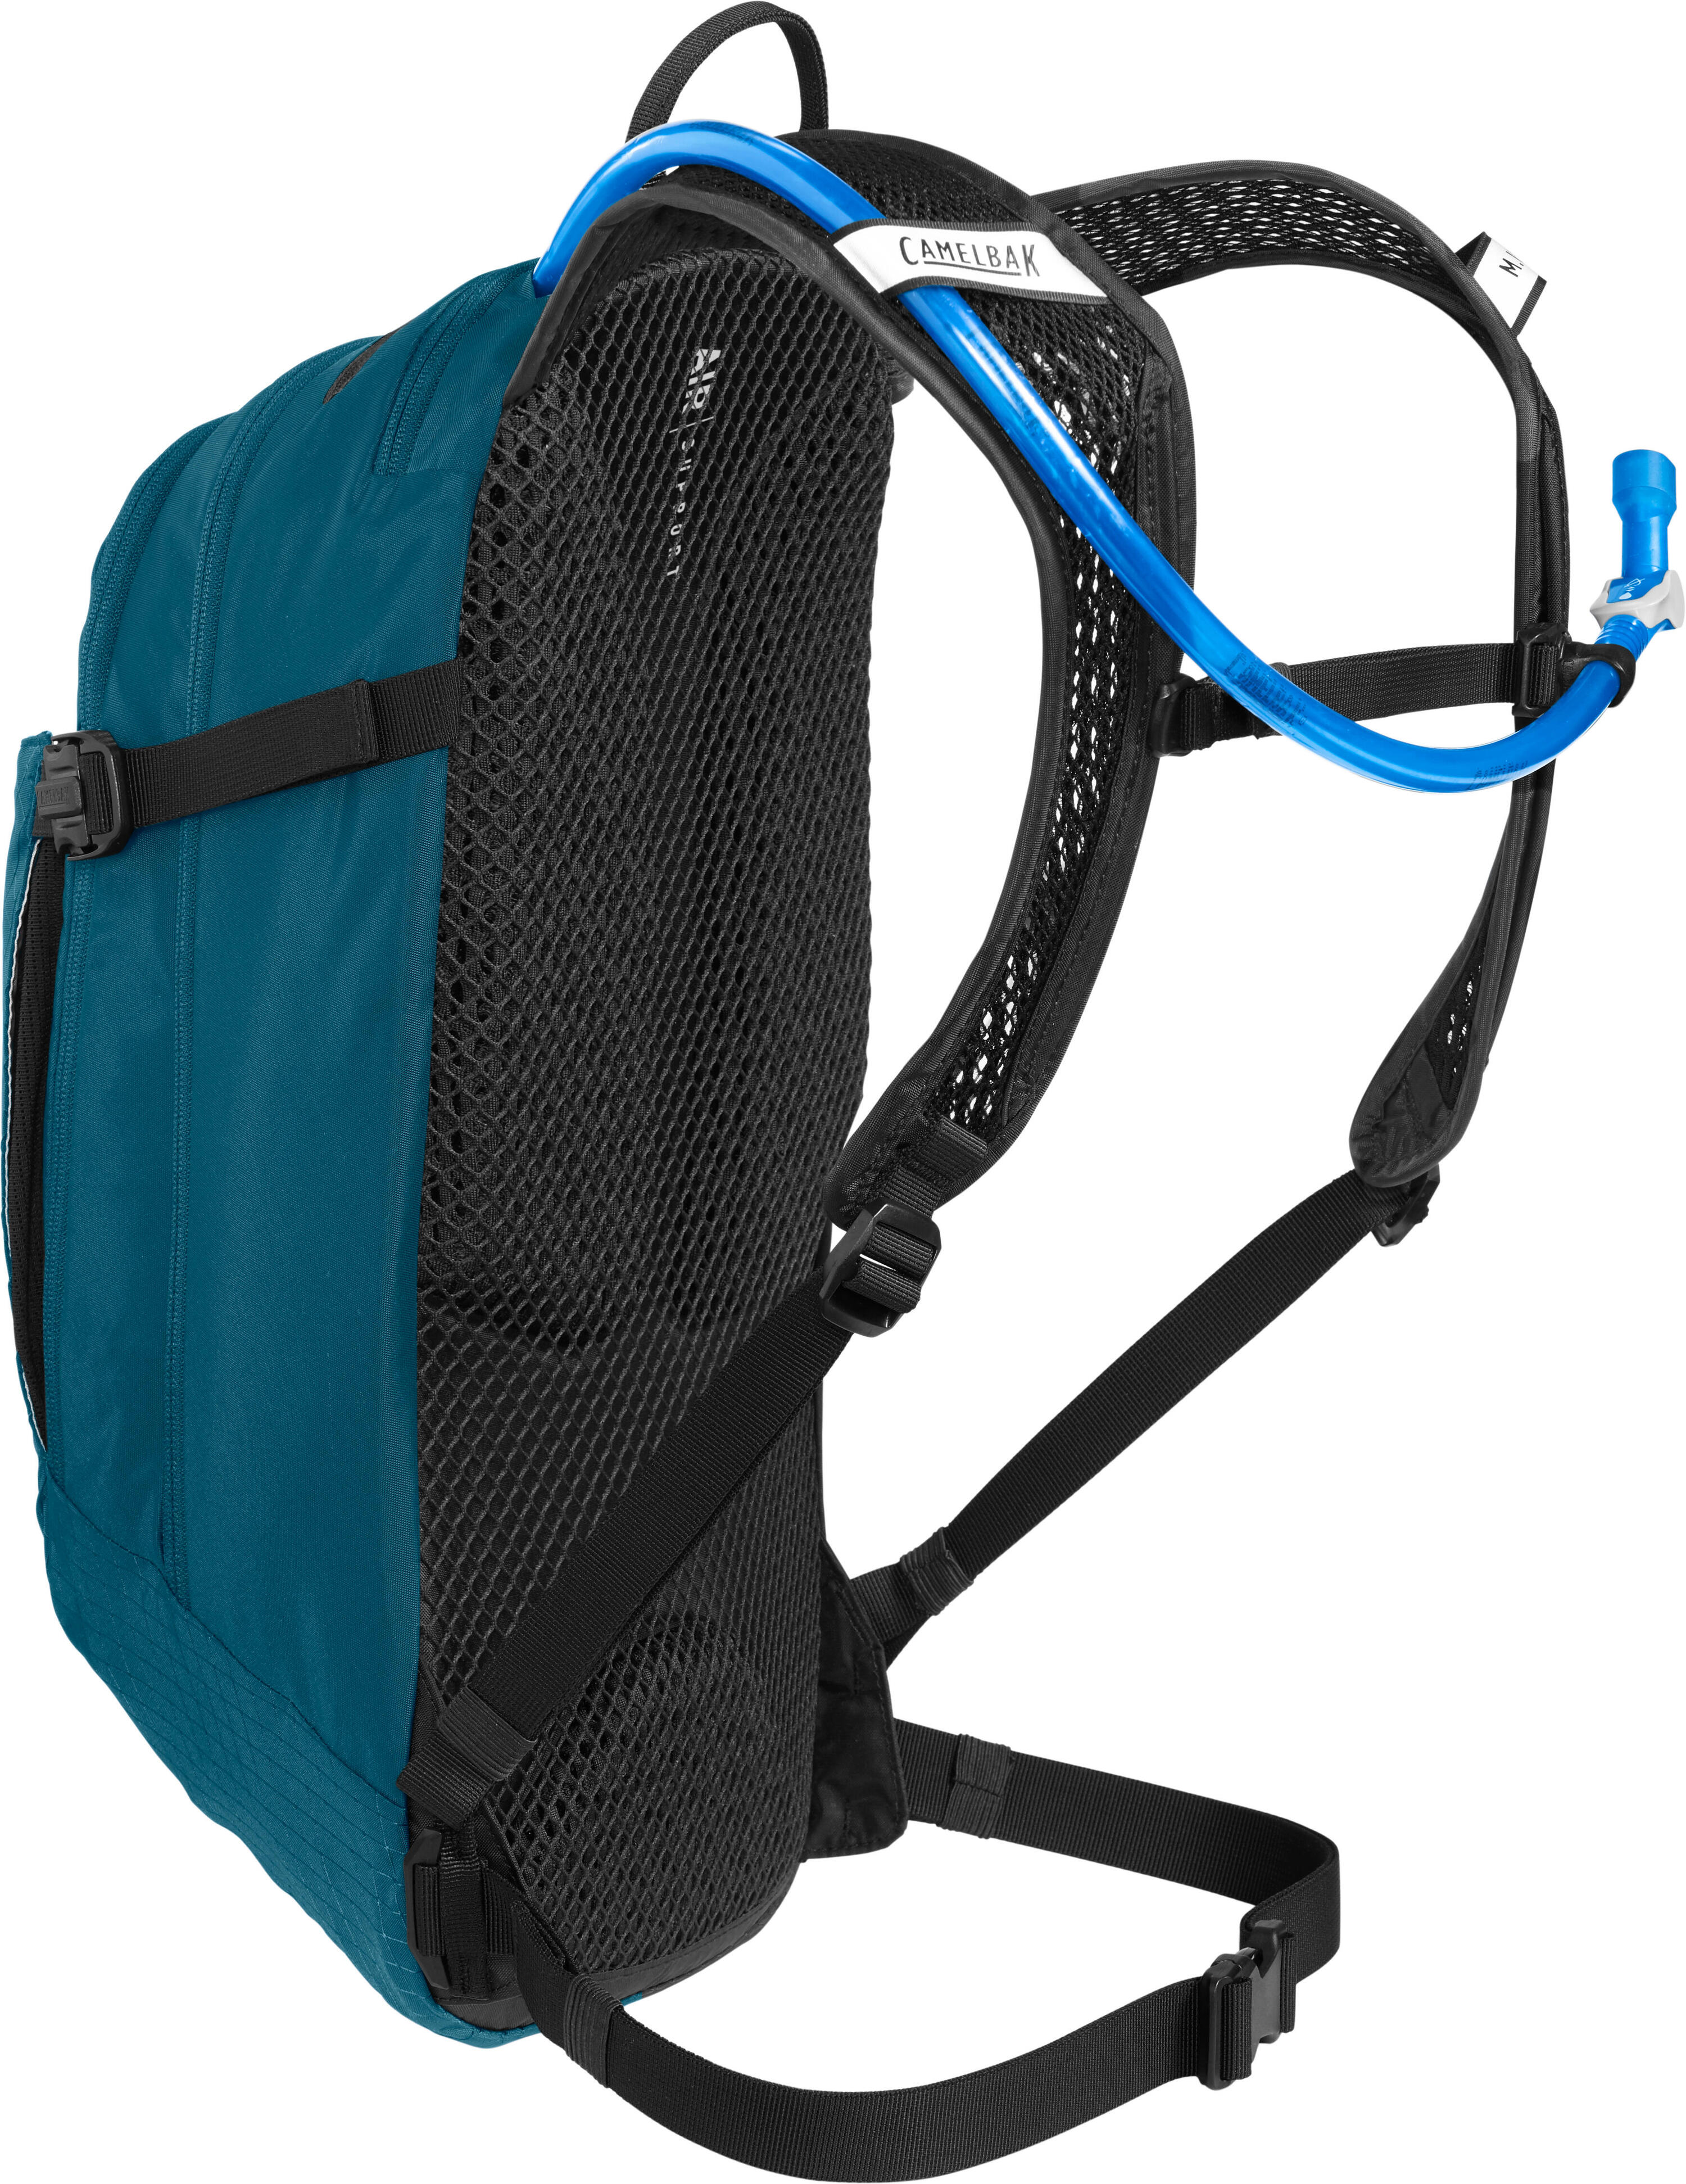 M.U.L.E. Hydration Pack 1with Reservoir 2/7